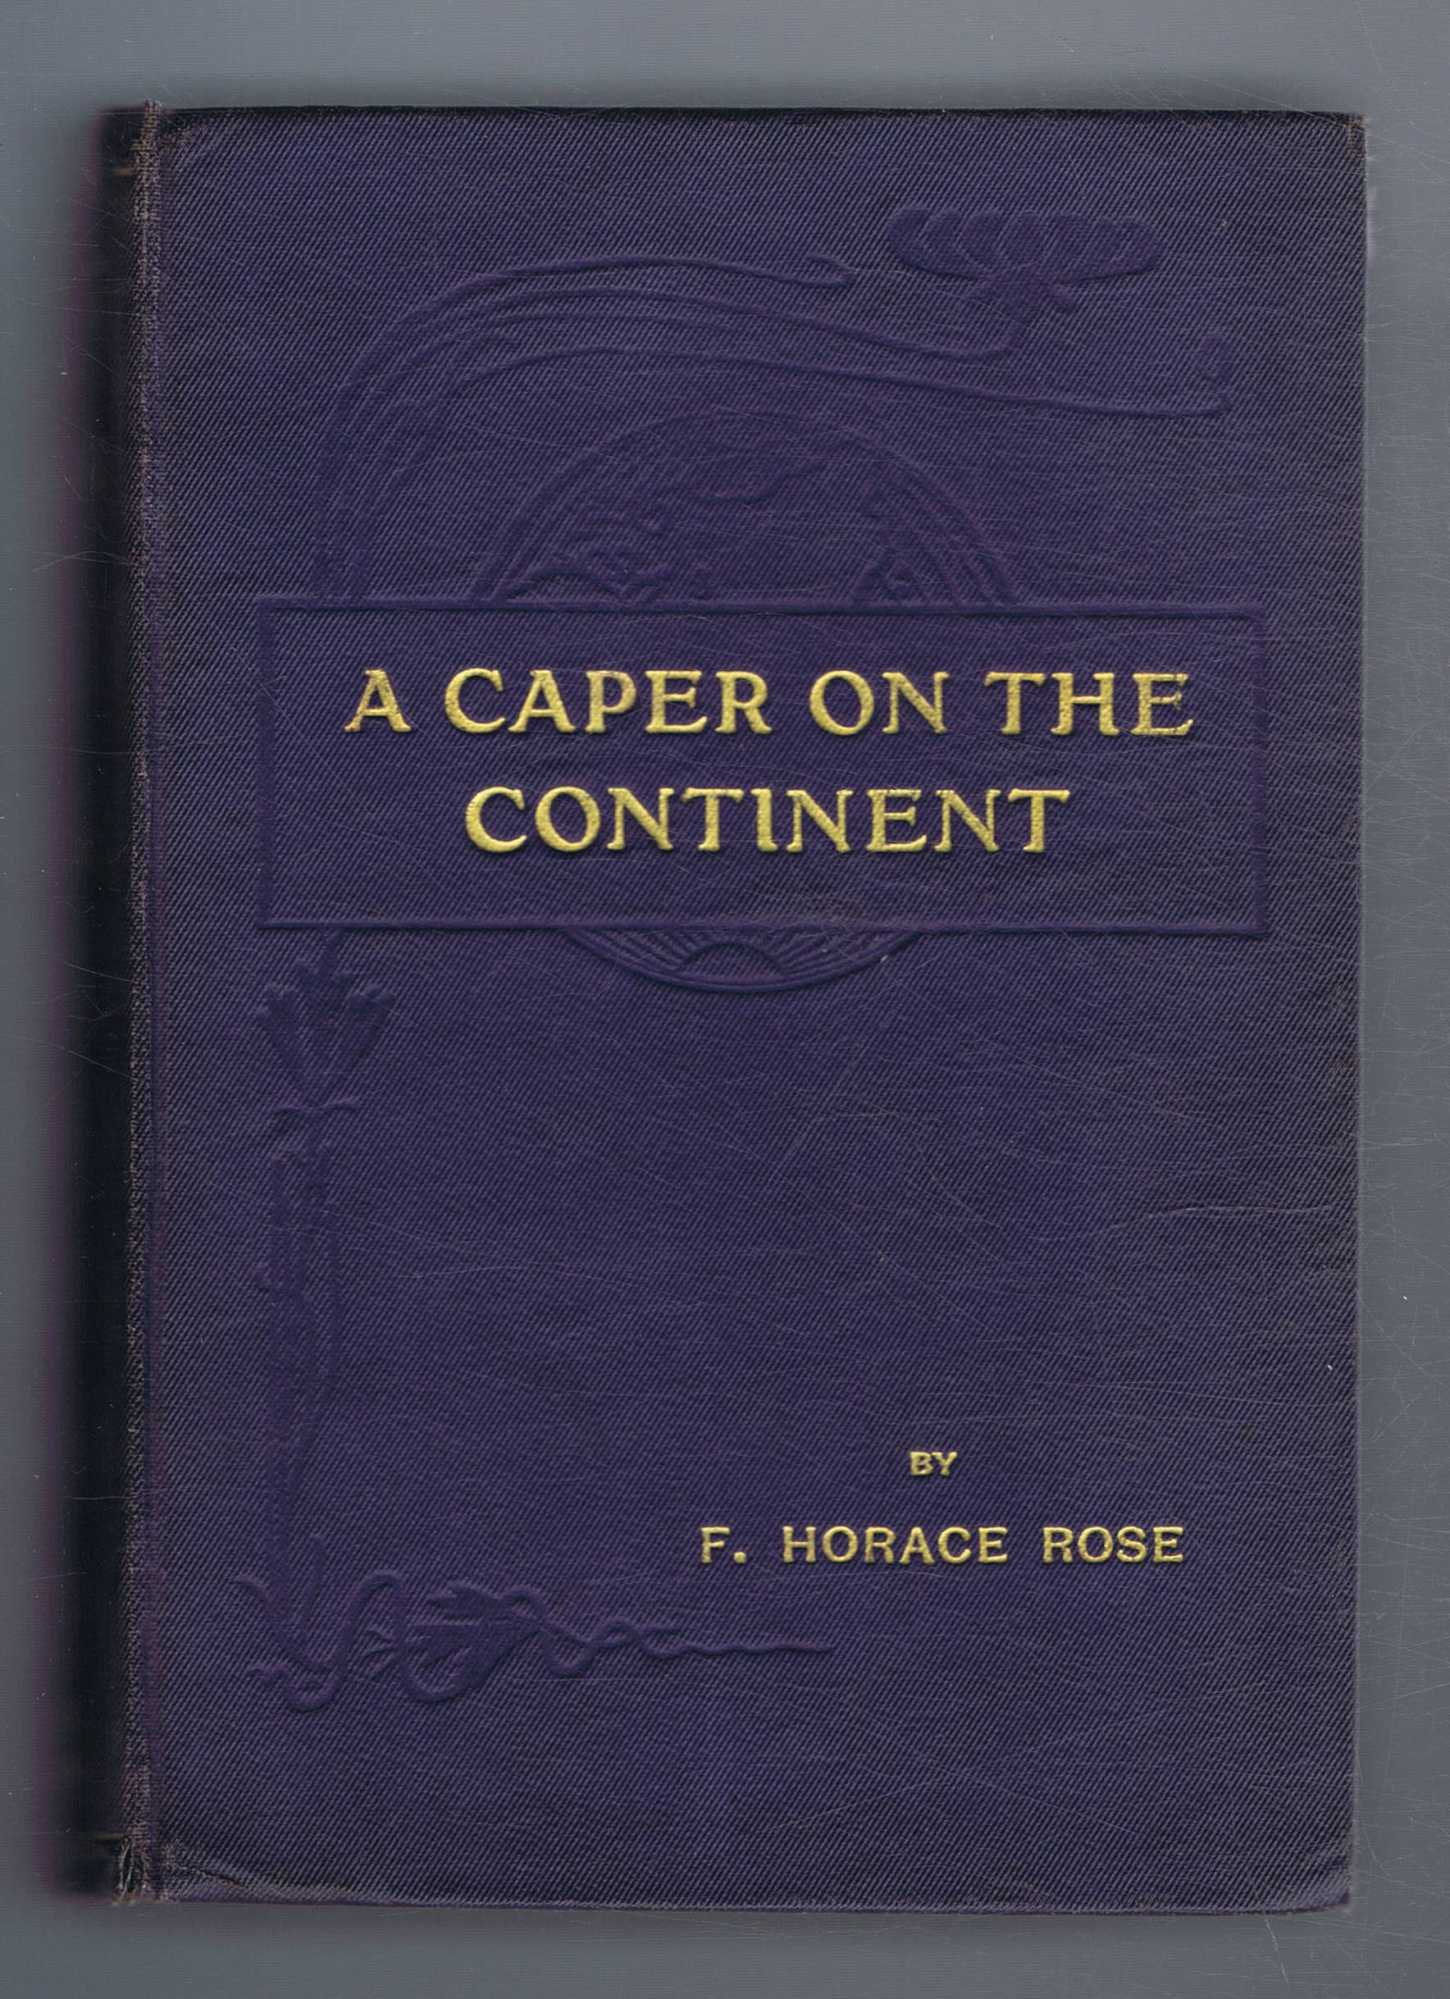 Rose, F. Horace - A Caper on the Continent